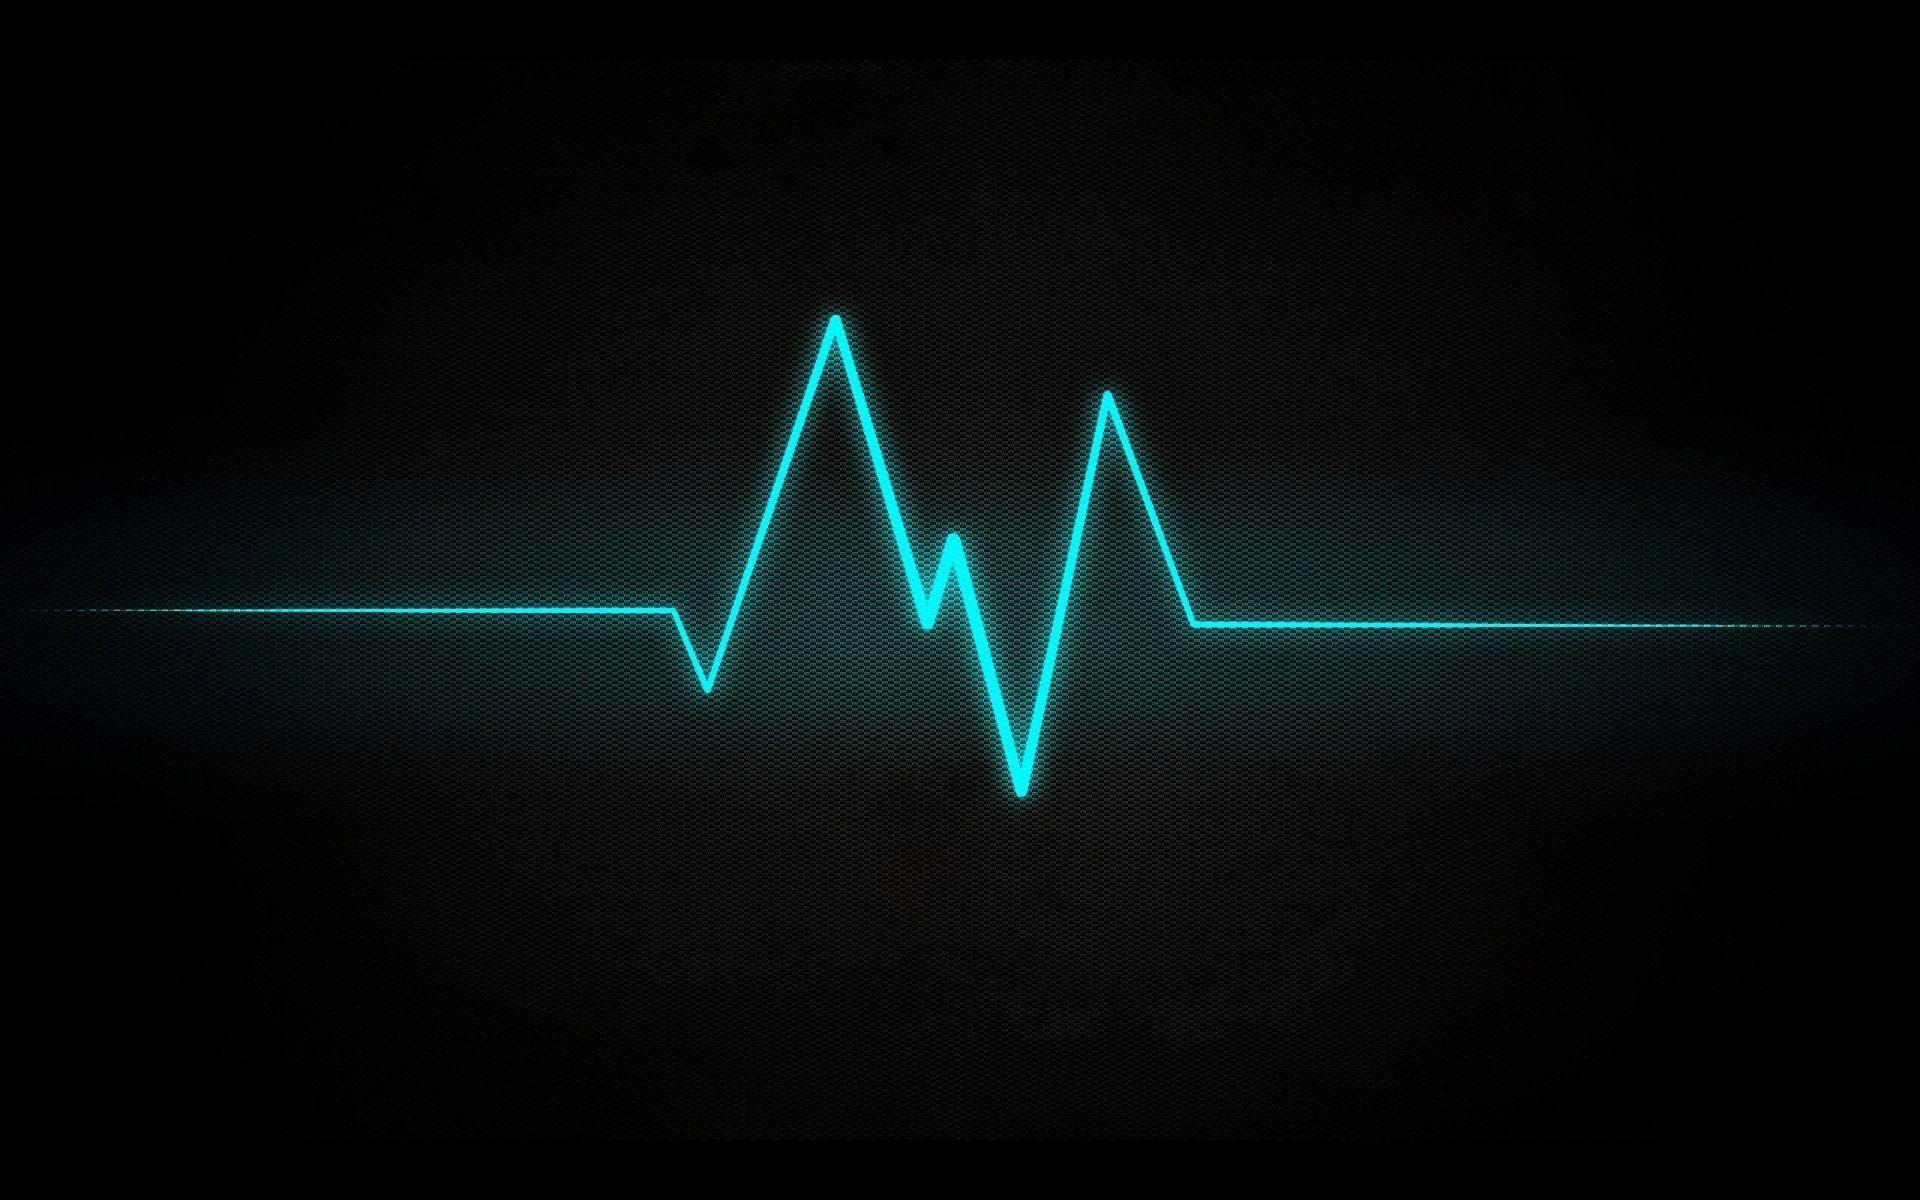 Very visible heartbeat sound pictures